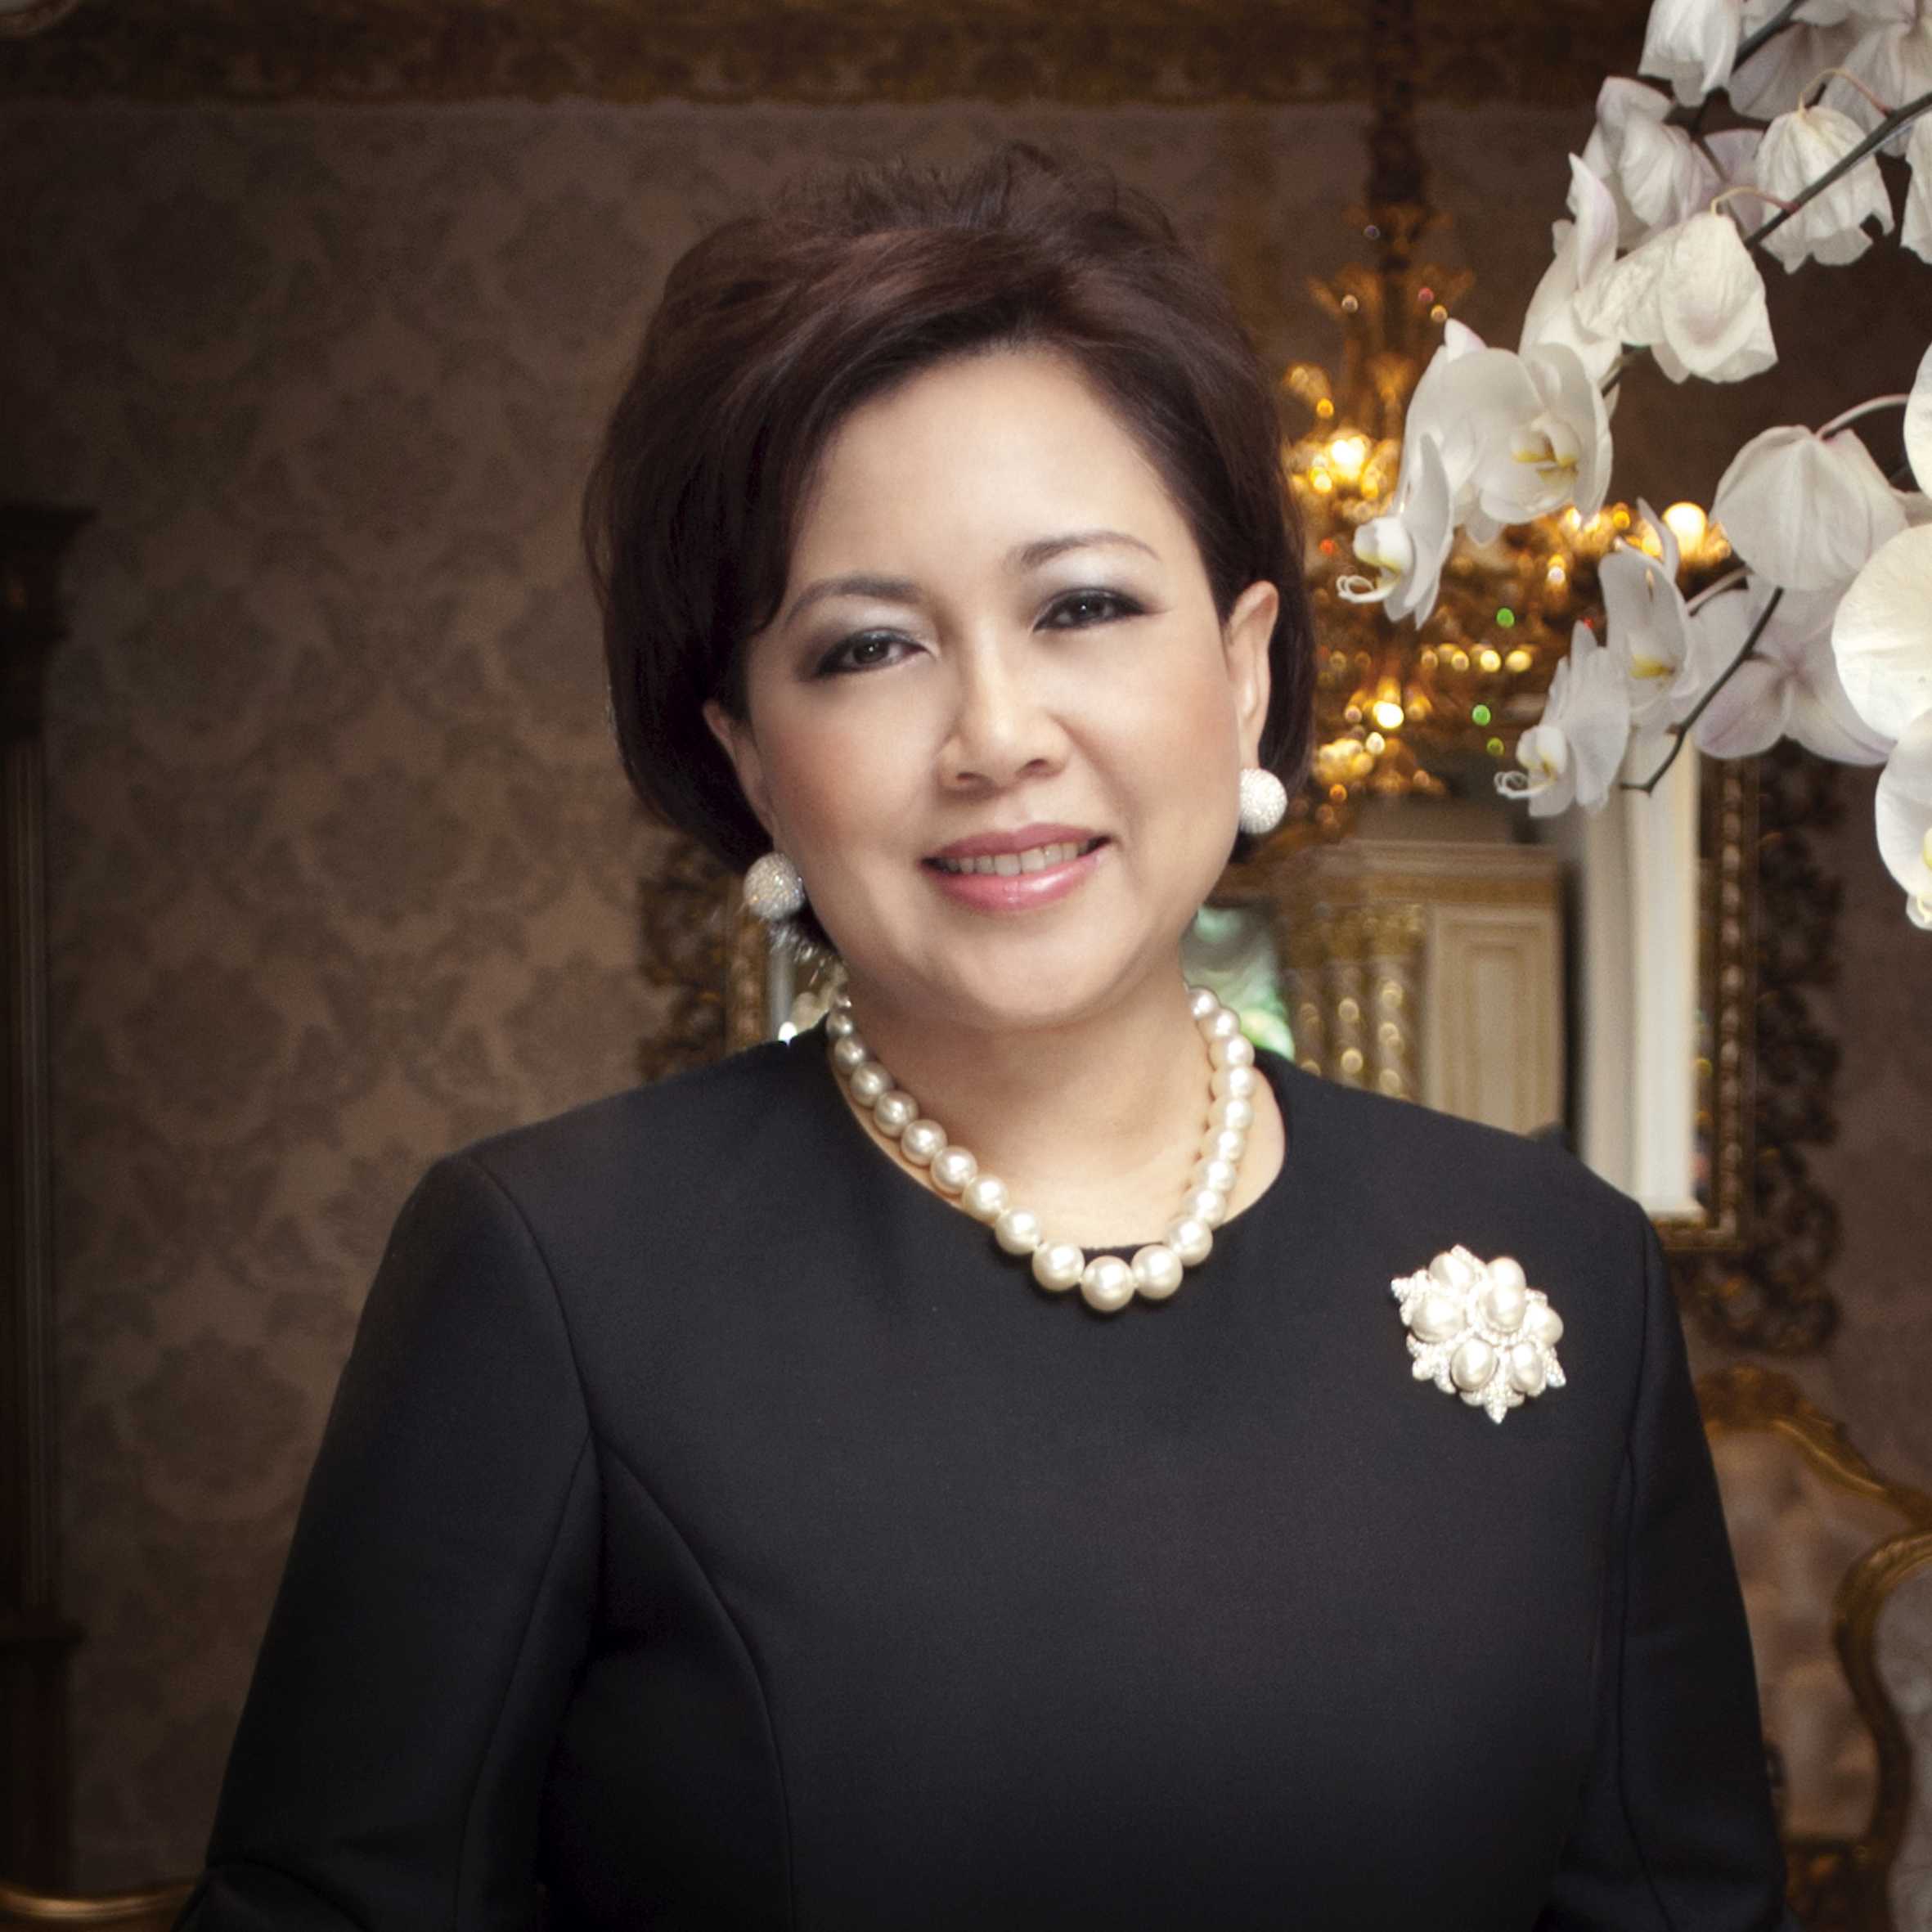 Evelina F. Pietruschka is president commissioner (chairperson) of WanaArtha Life, an Indonesian life insurer.